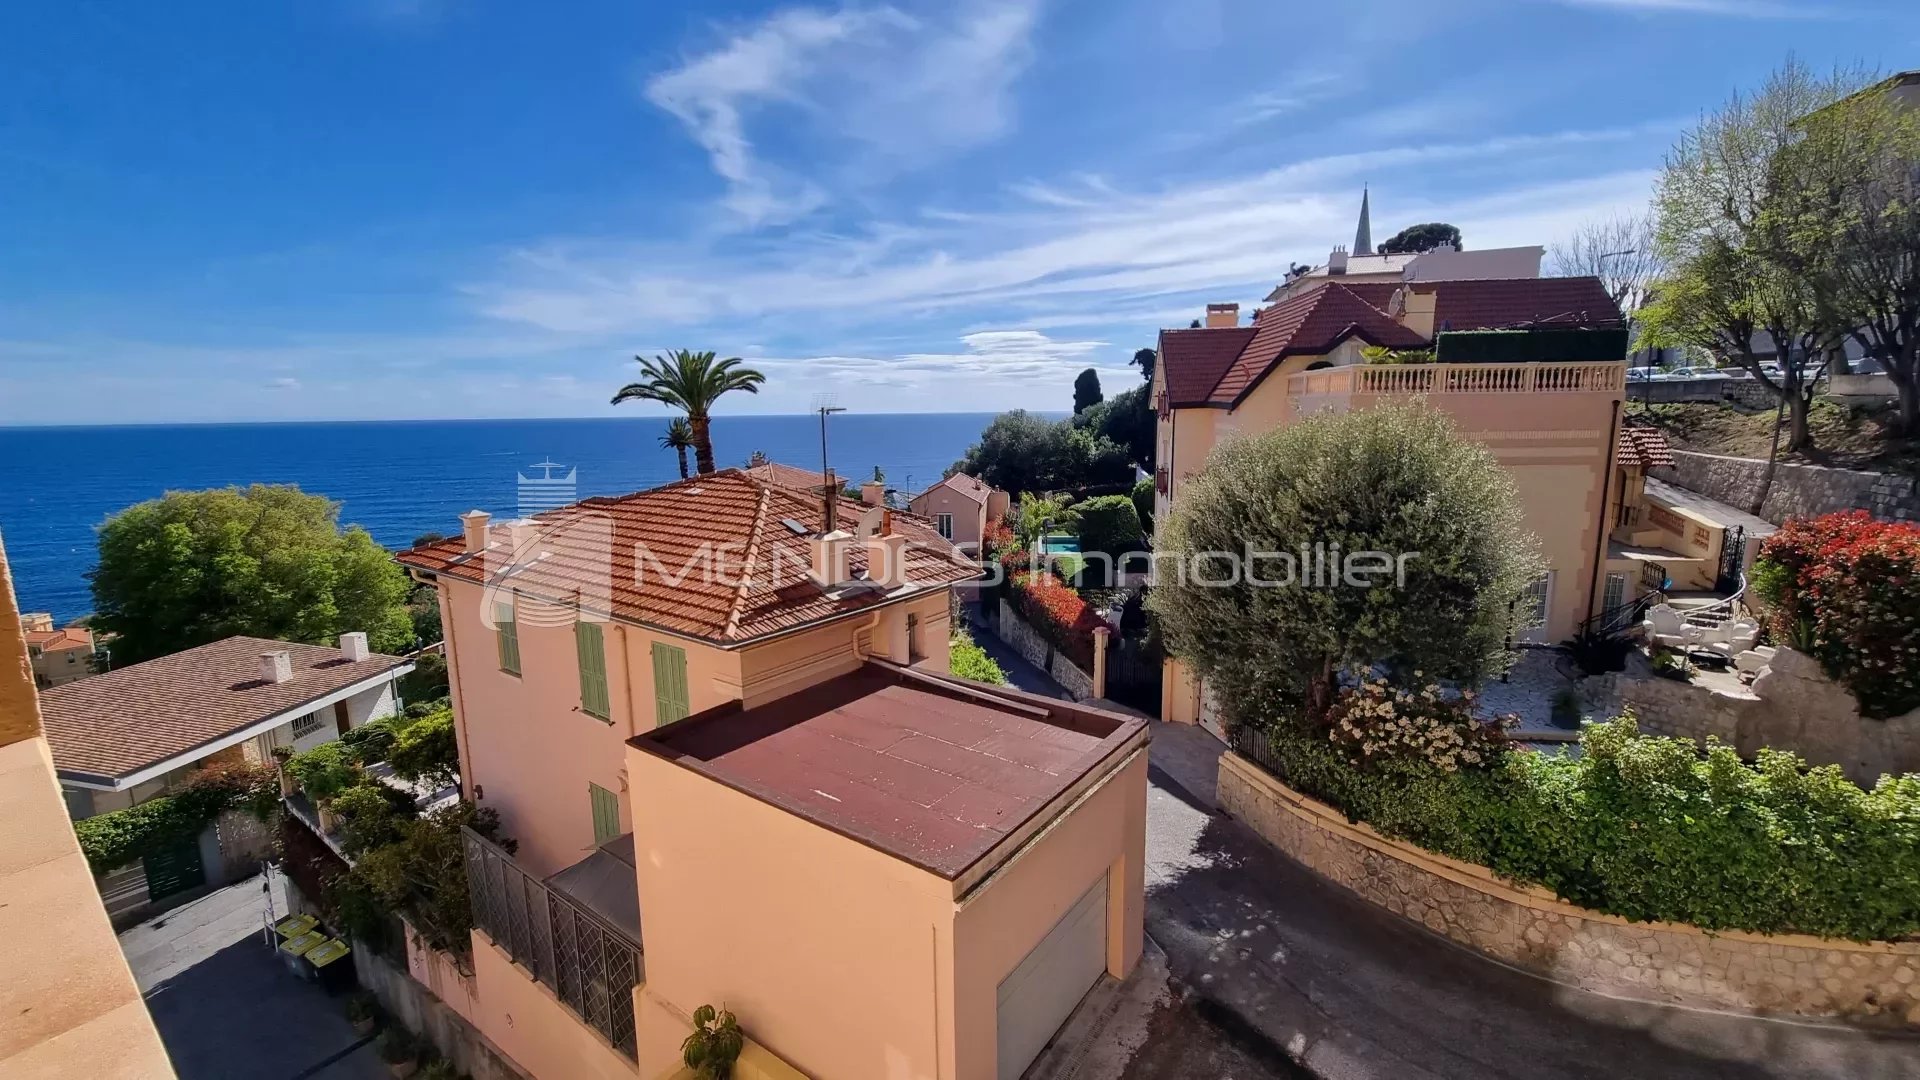 3BR WITH SEA VIEW IN CAP D'AIL